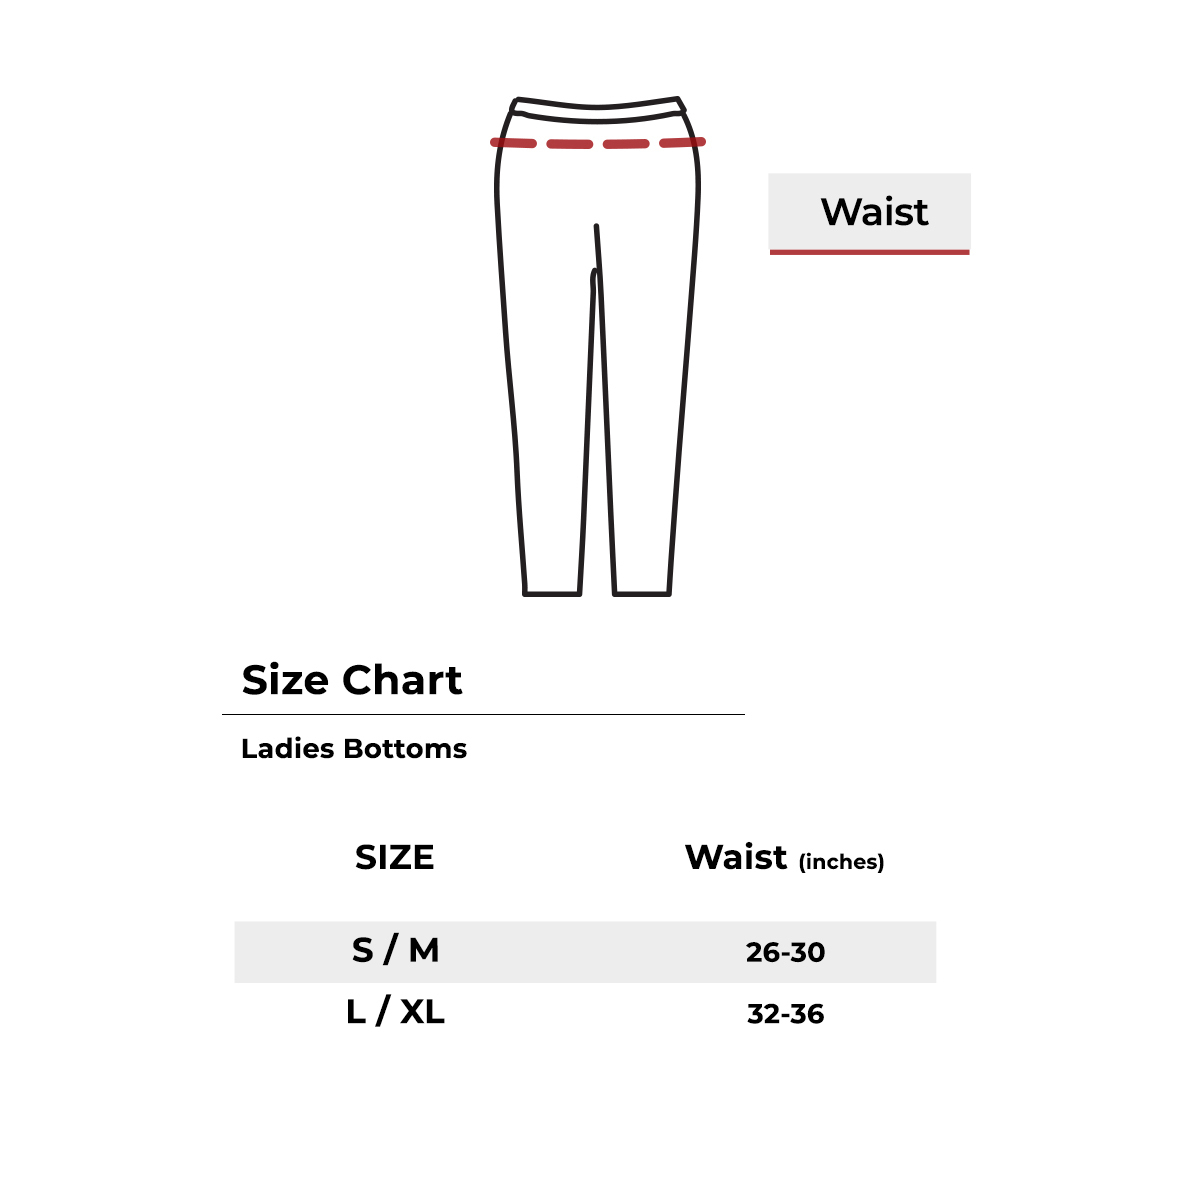 4-Pack Women's High Waisted Anti Cellulite Solid Leggings - S/M